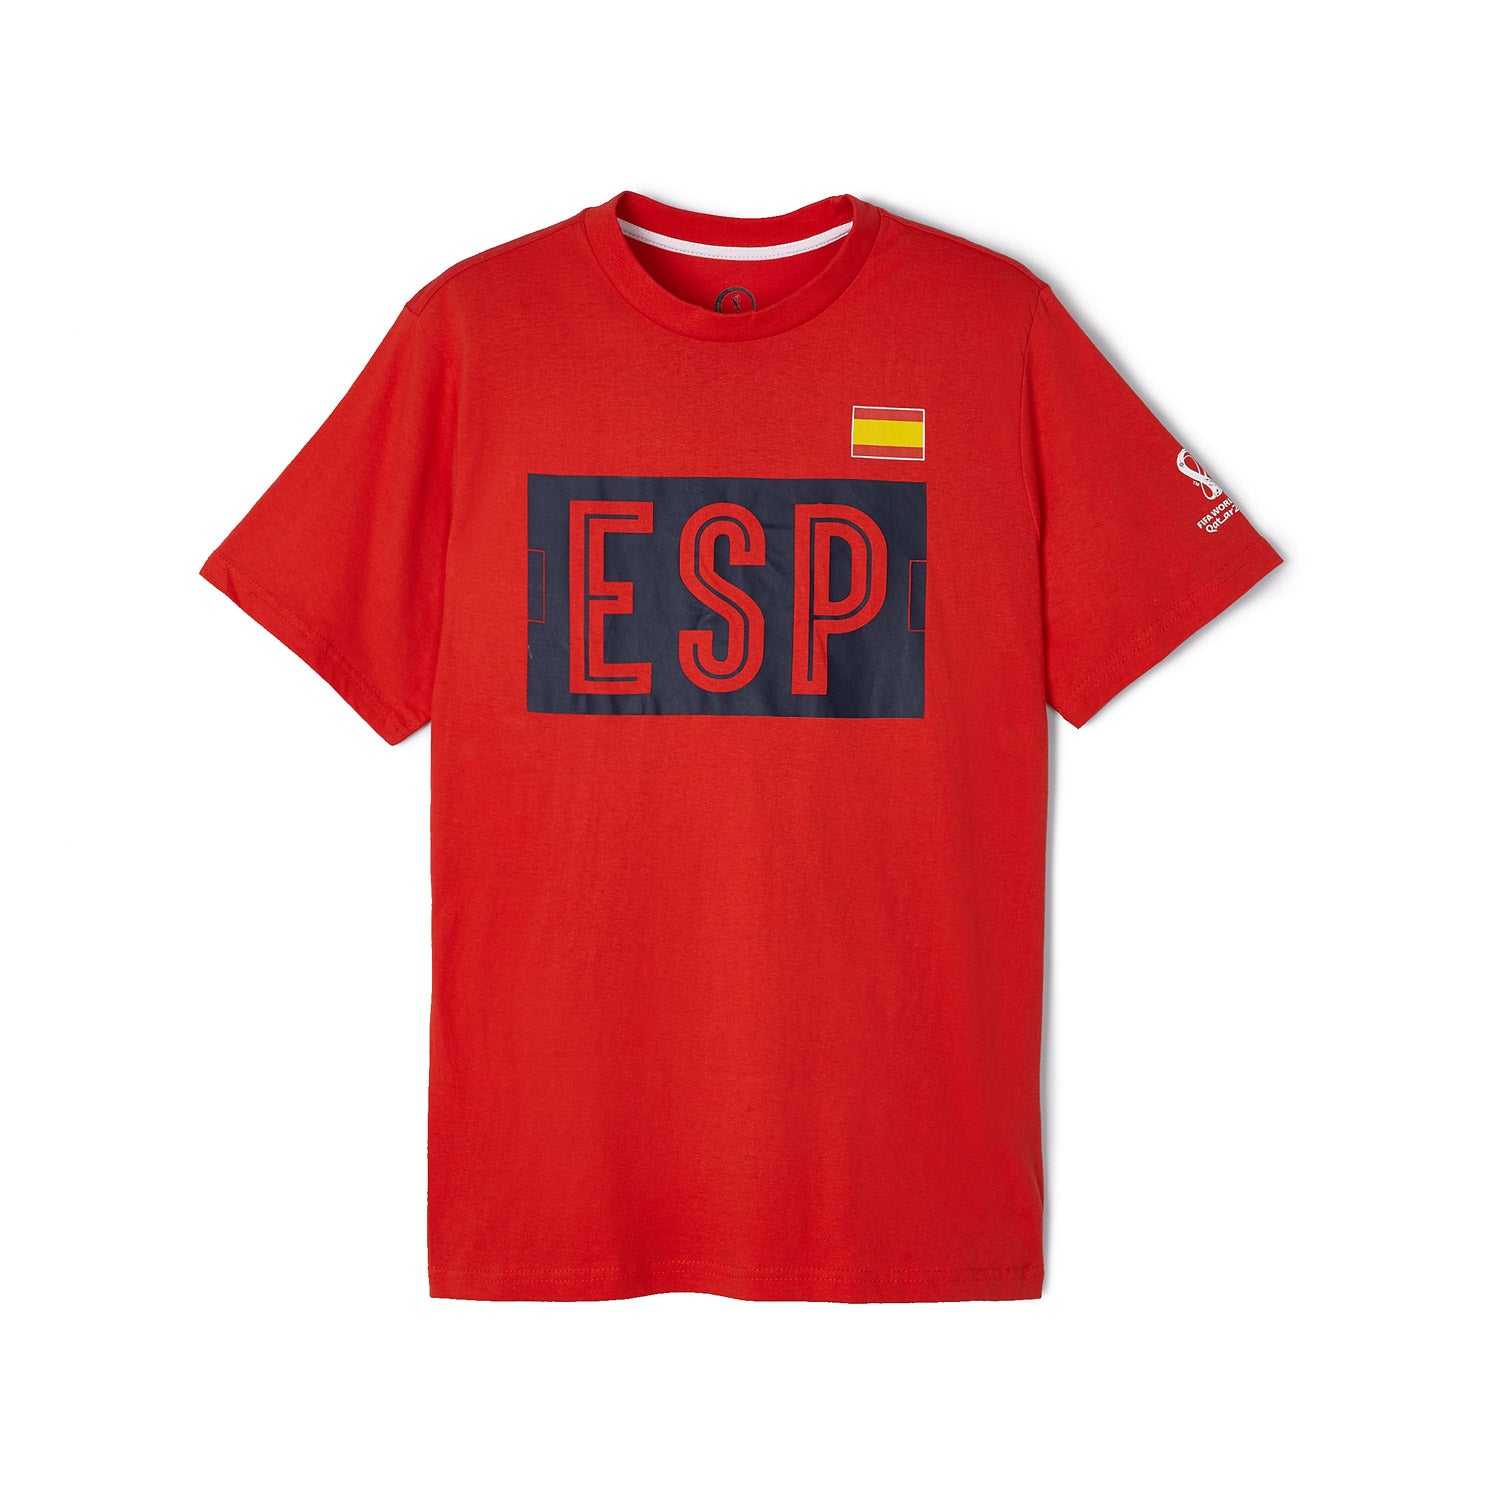 2022 World Cup Spain Red T-Shirt - Mens